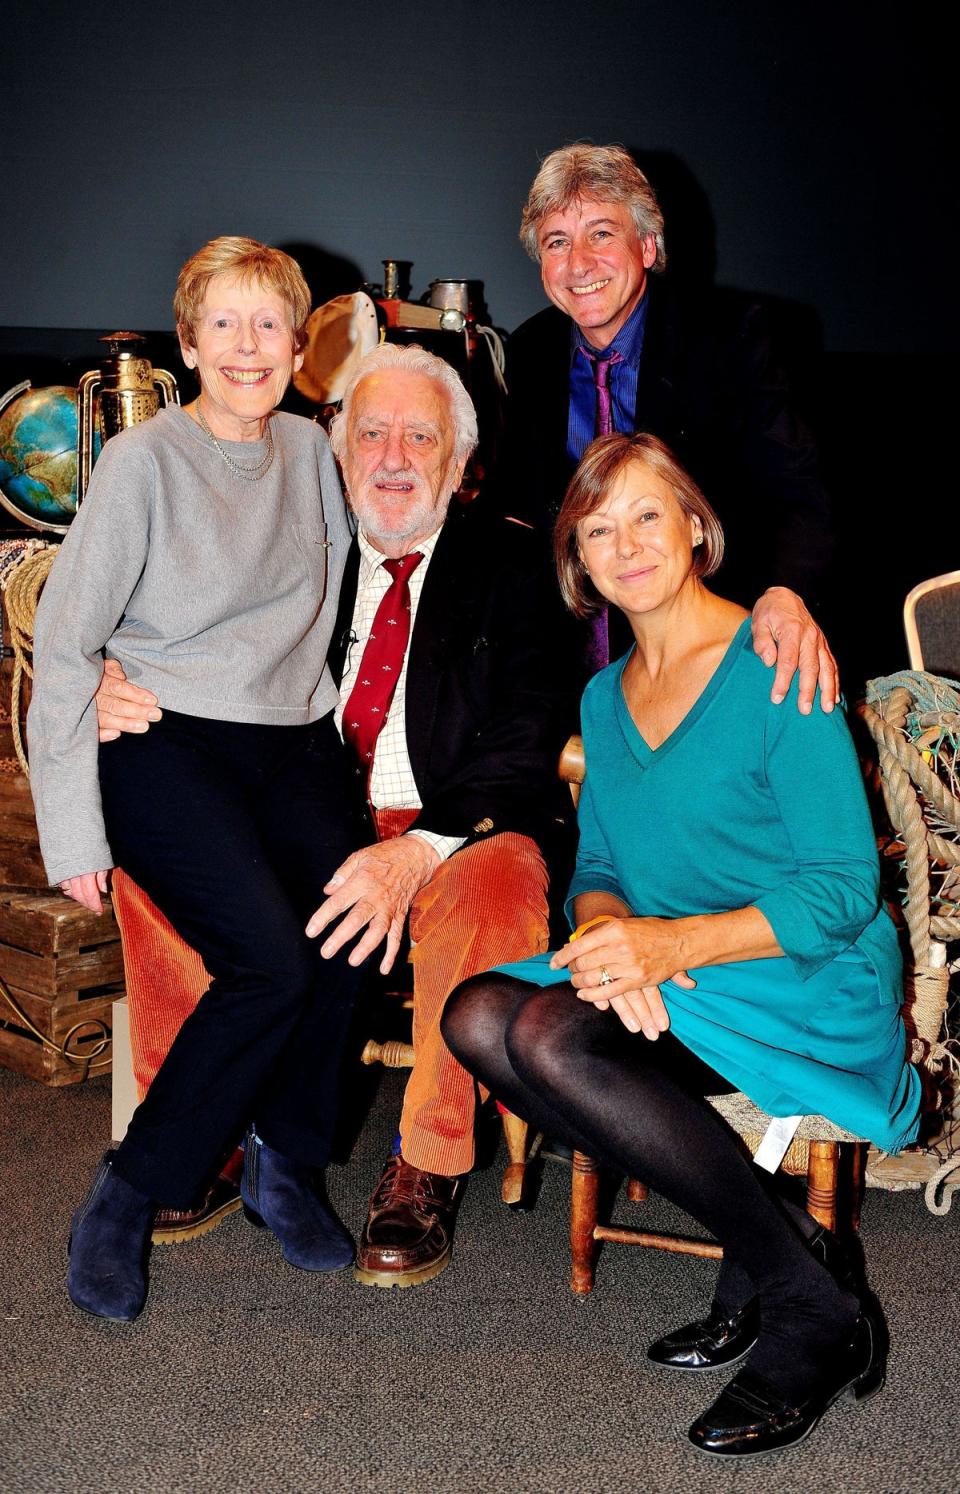 Bernard Cribbins (centre), with fellow cast members of The Railway Children (left to right) Deddie Davies, Gary Warren and Jenny Agutter, after he received the J M Barrie Award for a lifetime of unforgettable work for children on stage, film, television and record (Nicholas T Ansell/PA) (PA Wire)